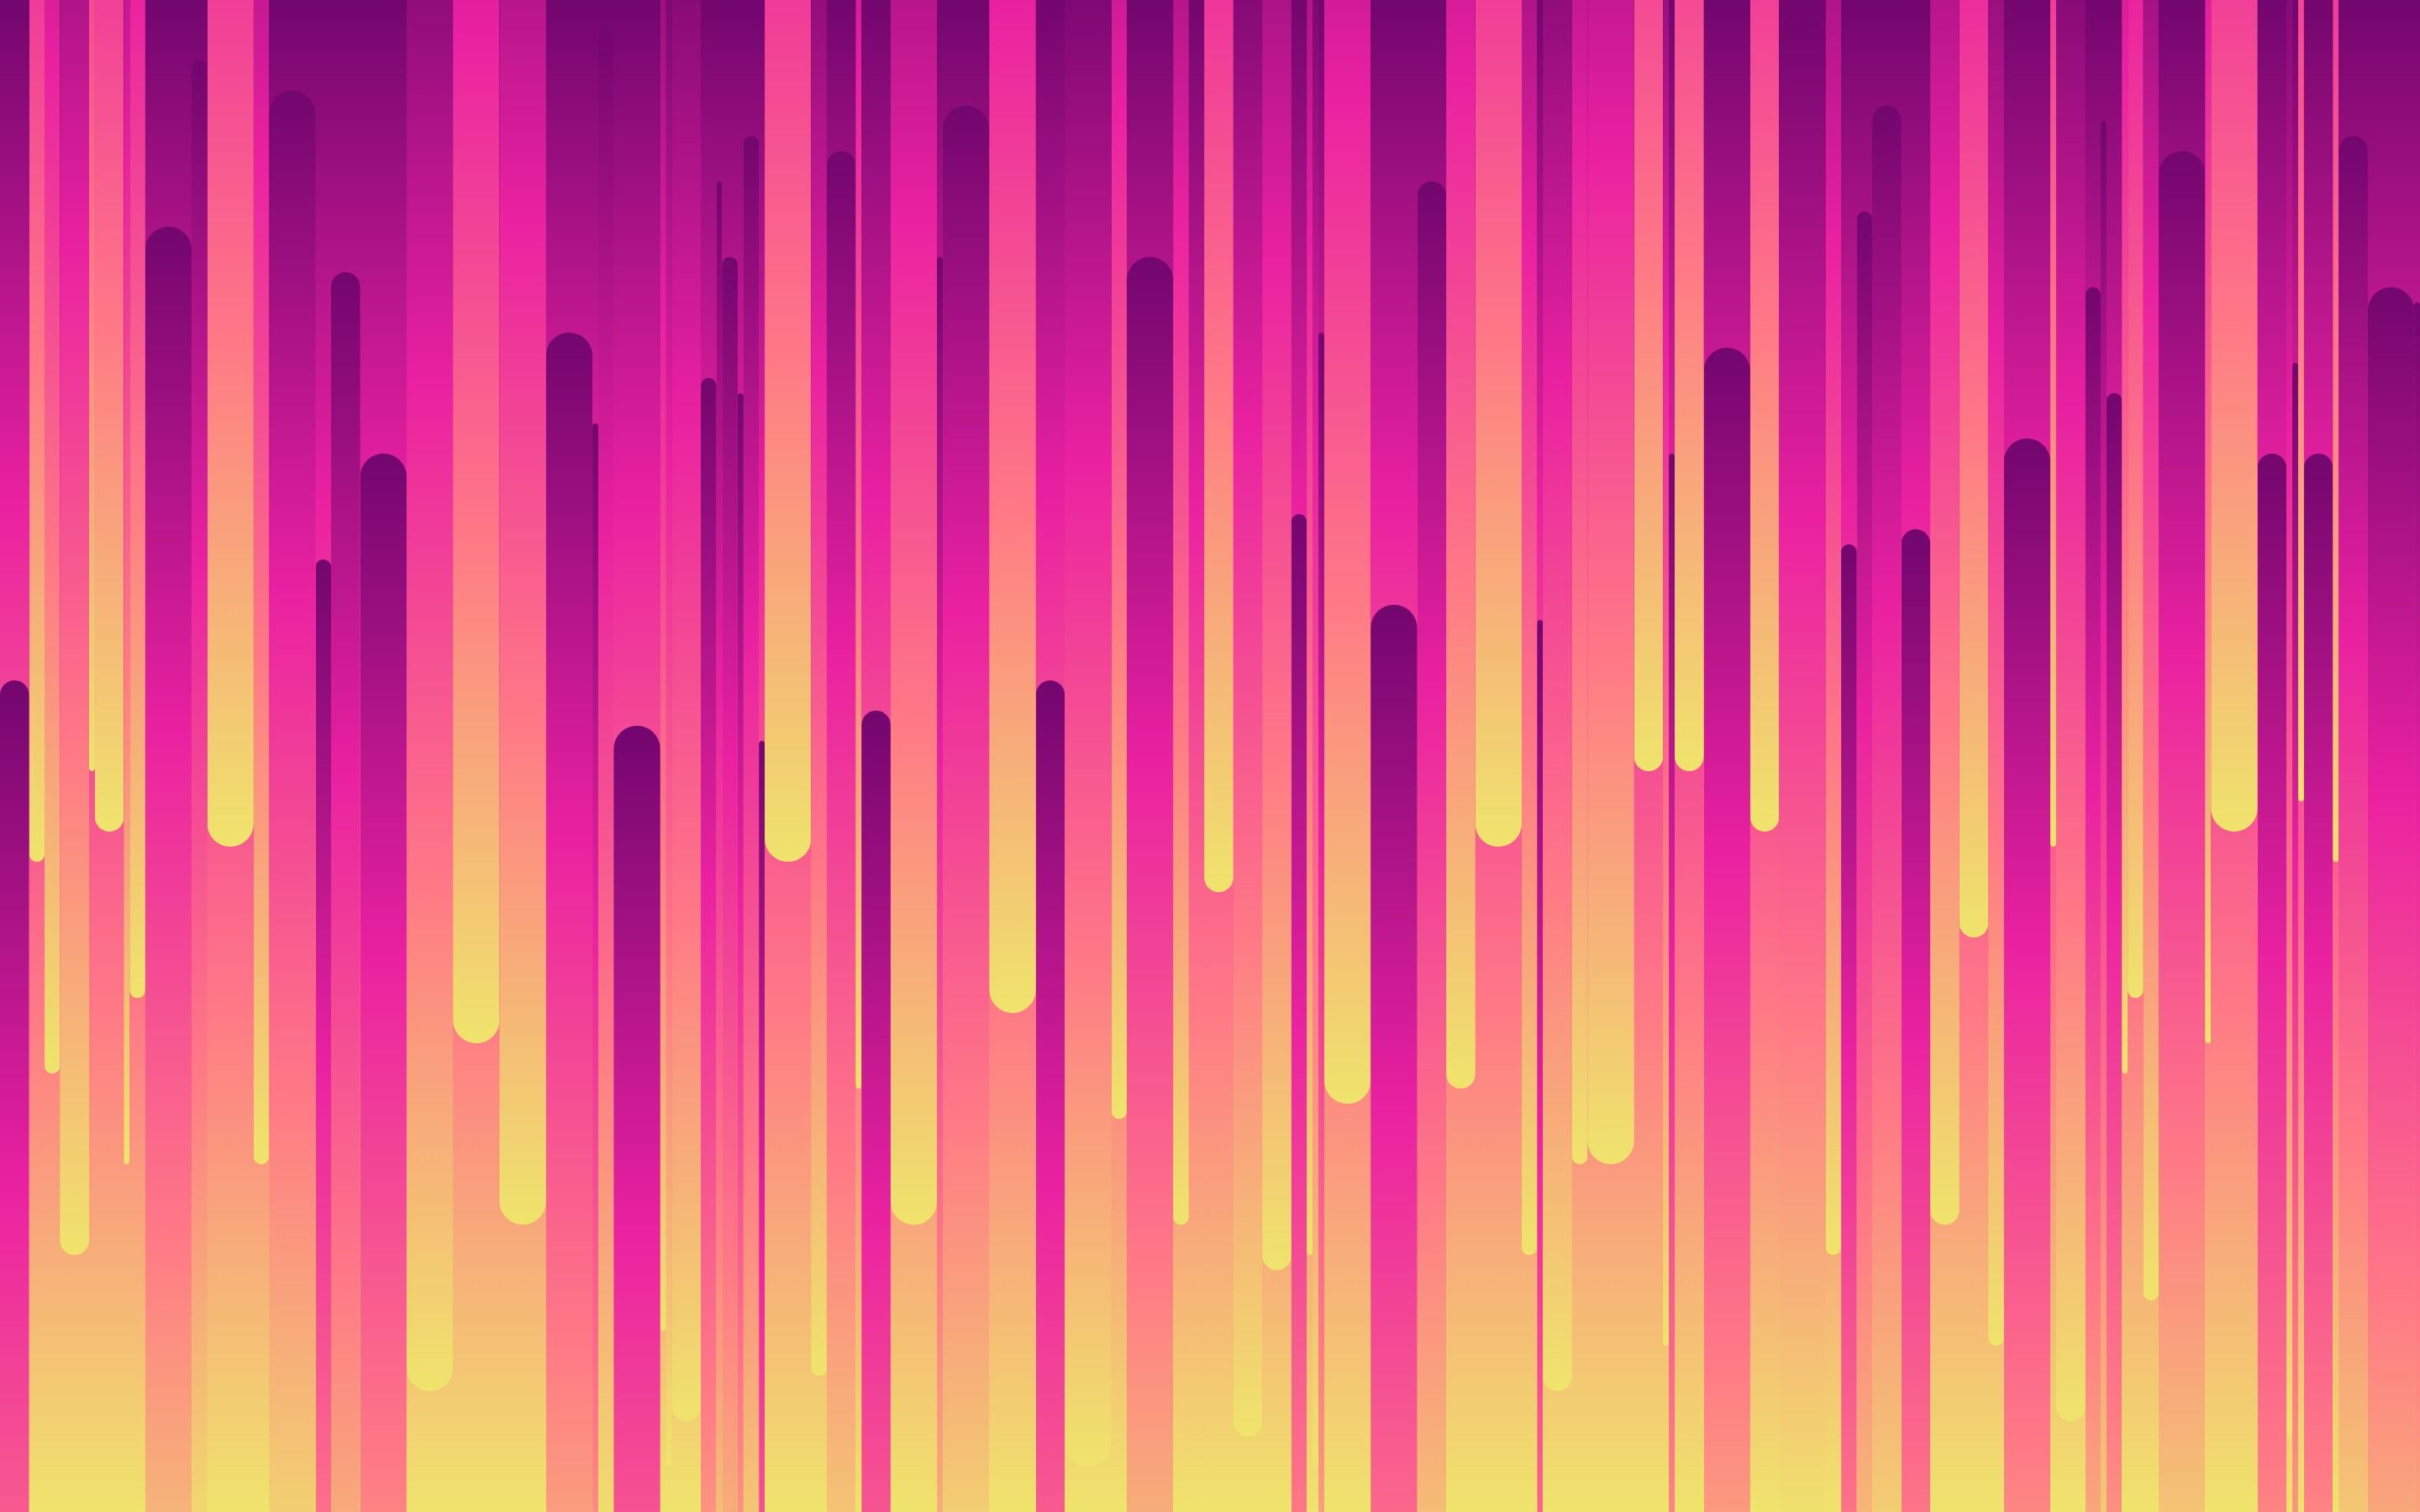 Glitch 4K wallpaper for your desktop or mobile screen free and easy to download